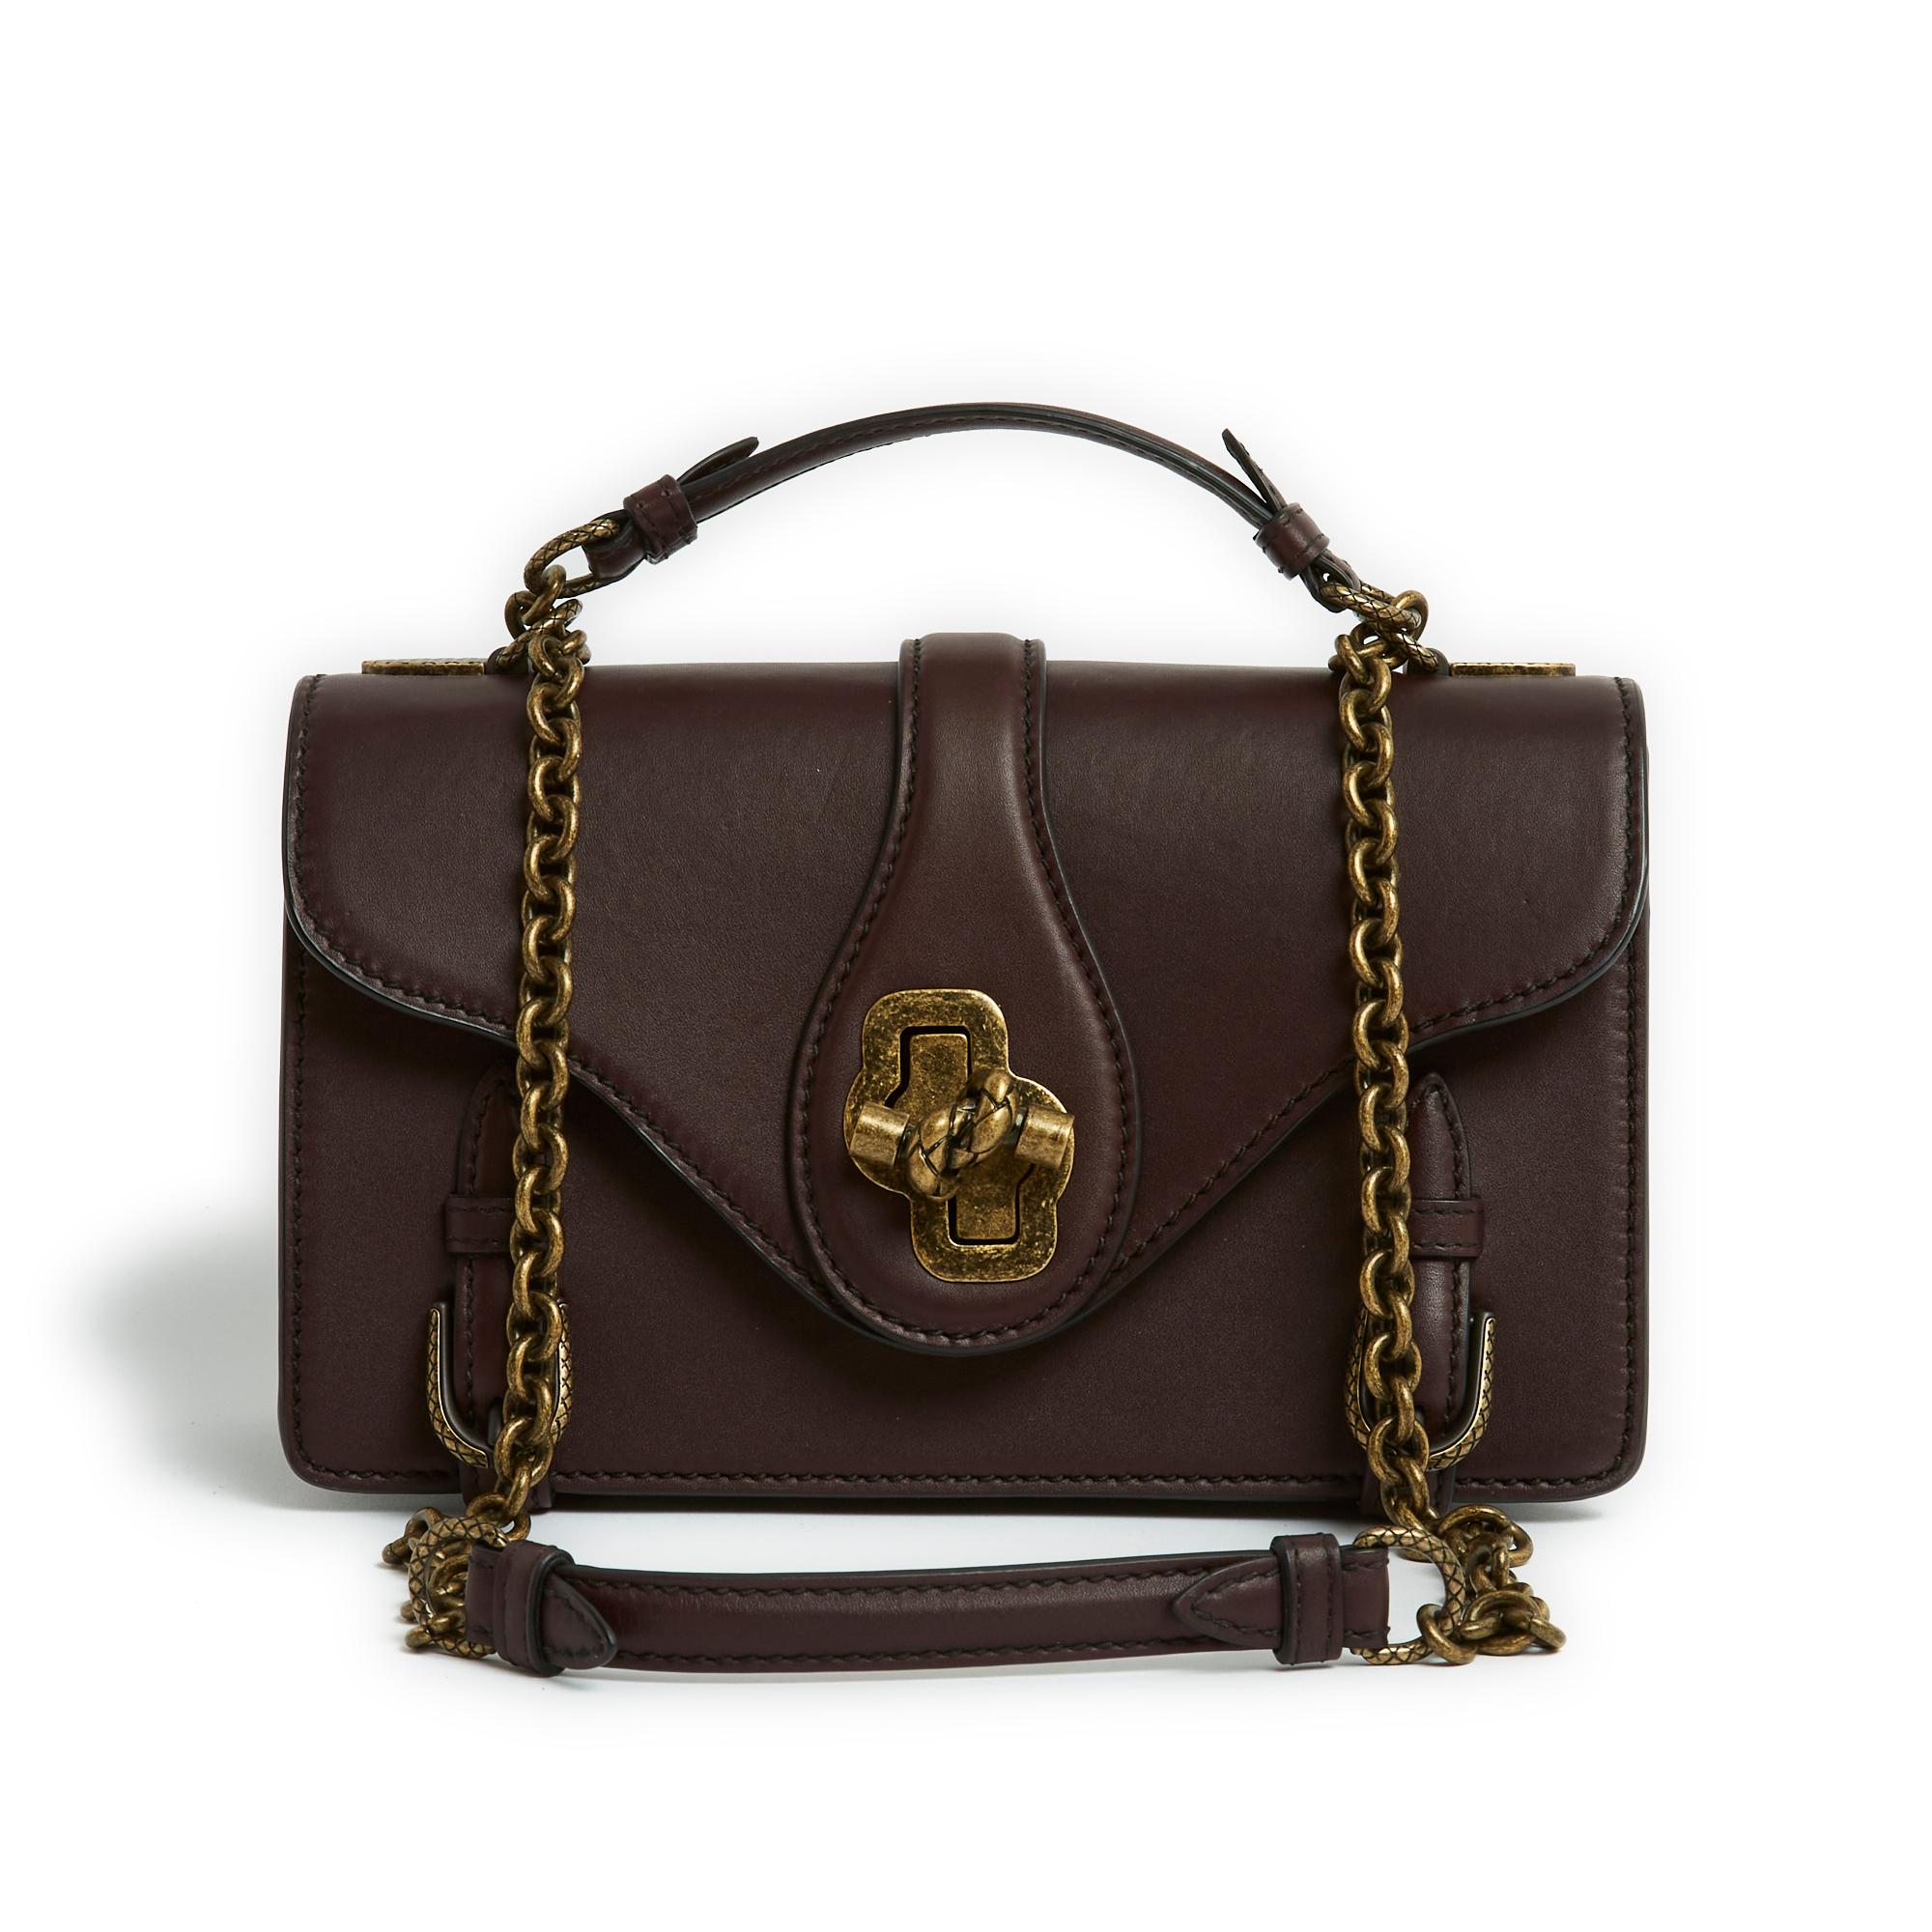 Bottega Veneta City Knot model bag in amaranth-colored leather (between burgundy, black and brown) and aged gold metal in intrecciato style, interior with 3 compartments dressed in taupe beige suede, shoulder strap in matching metal chain and